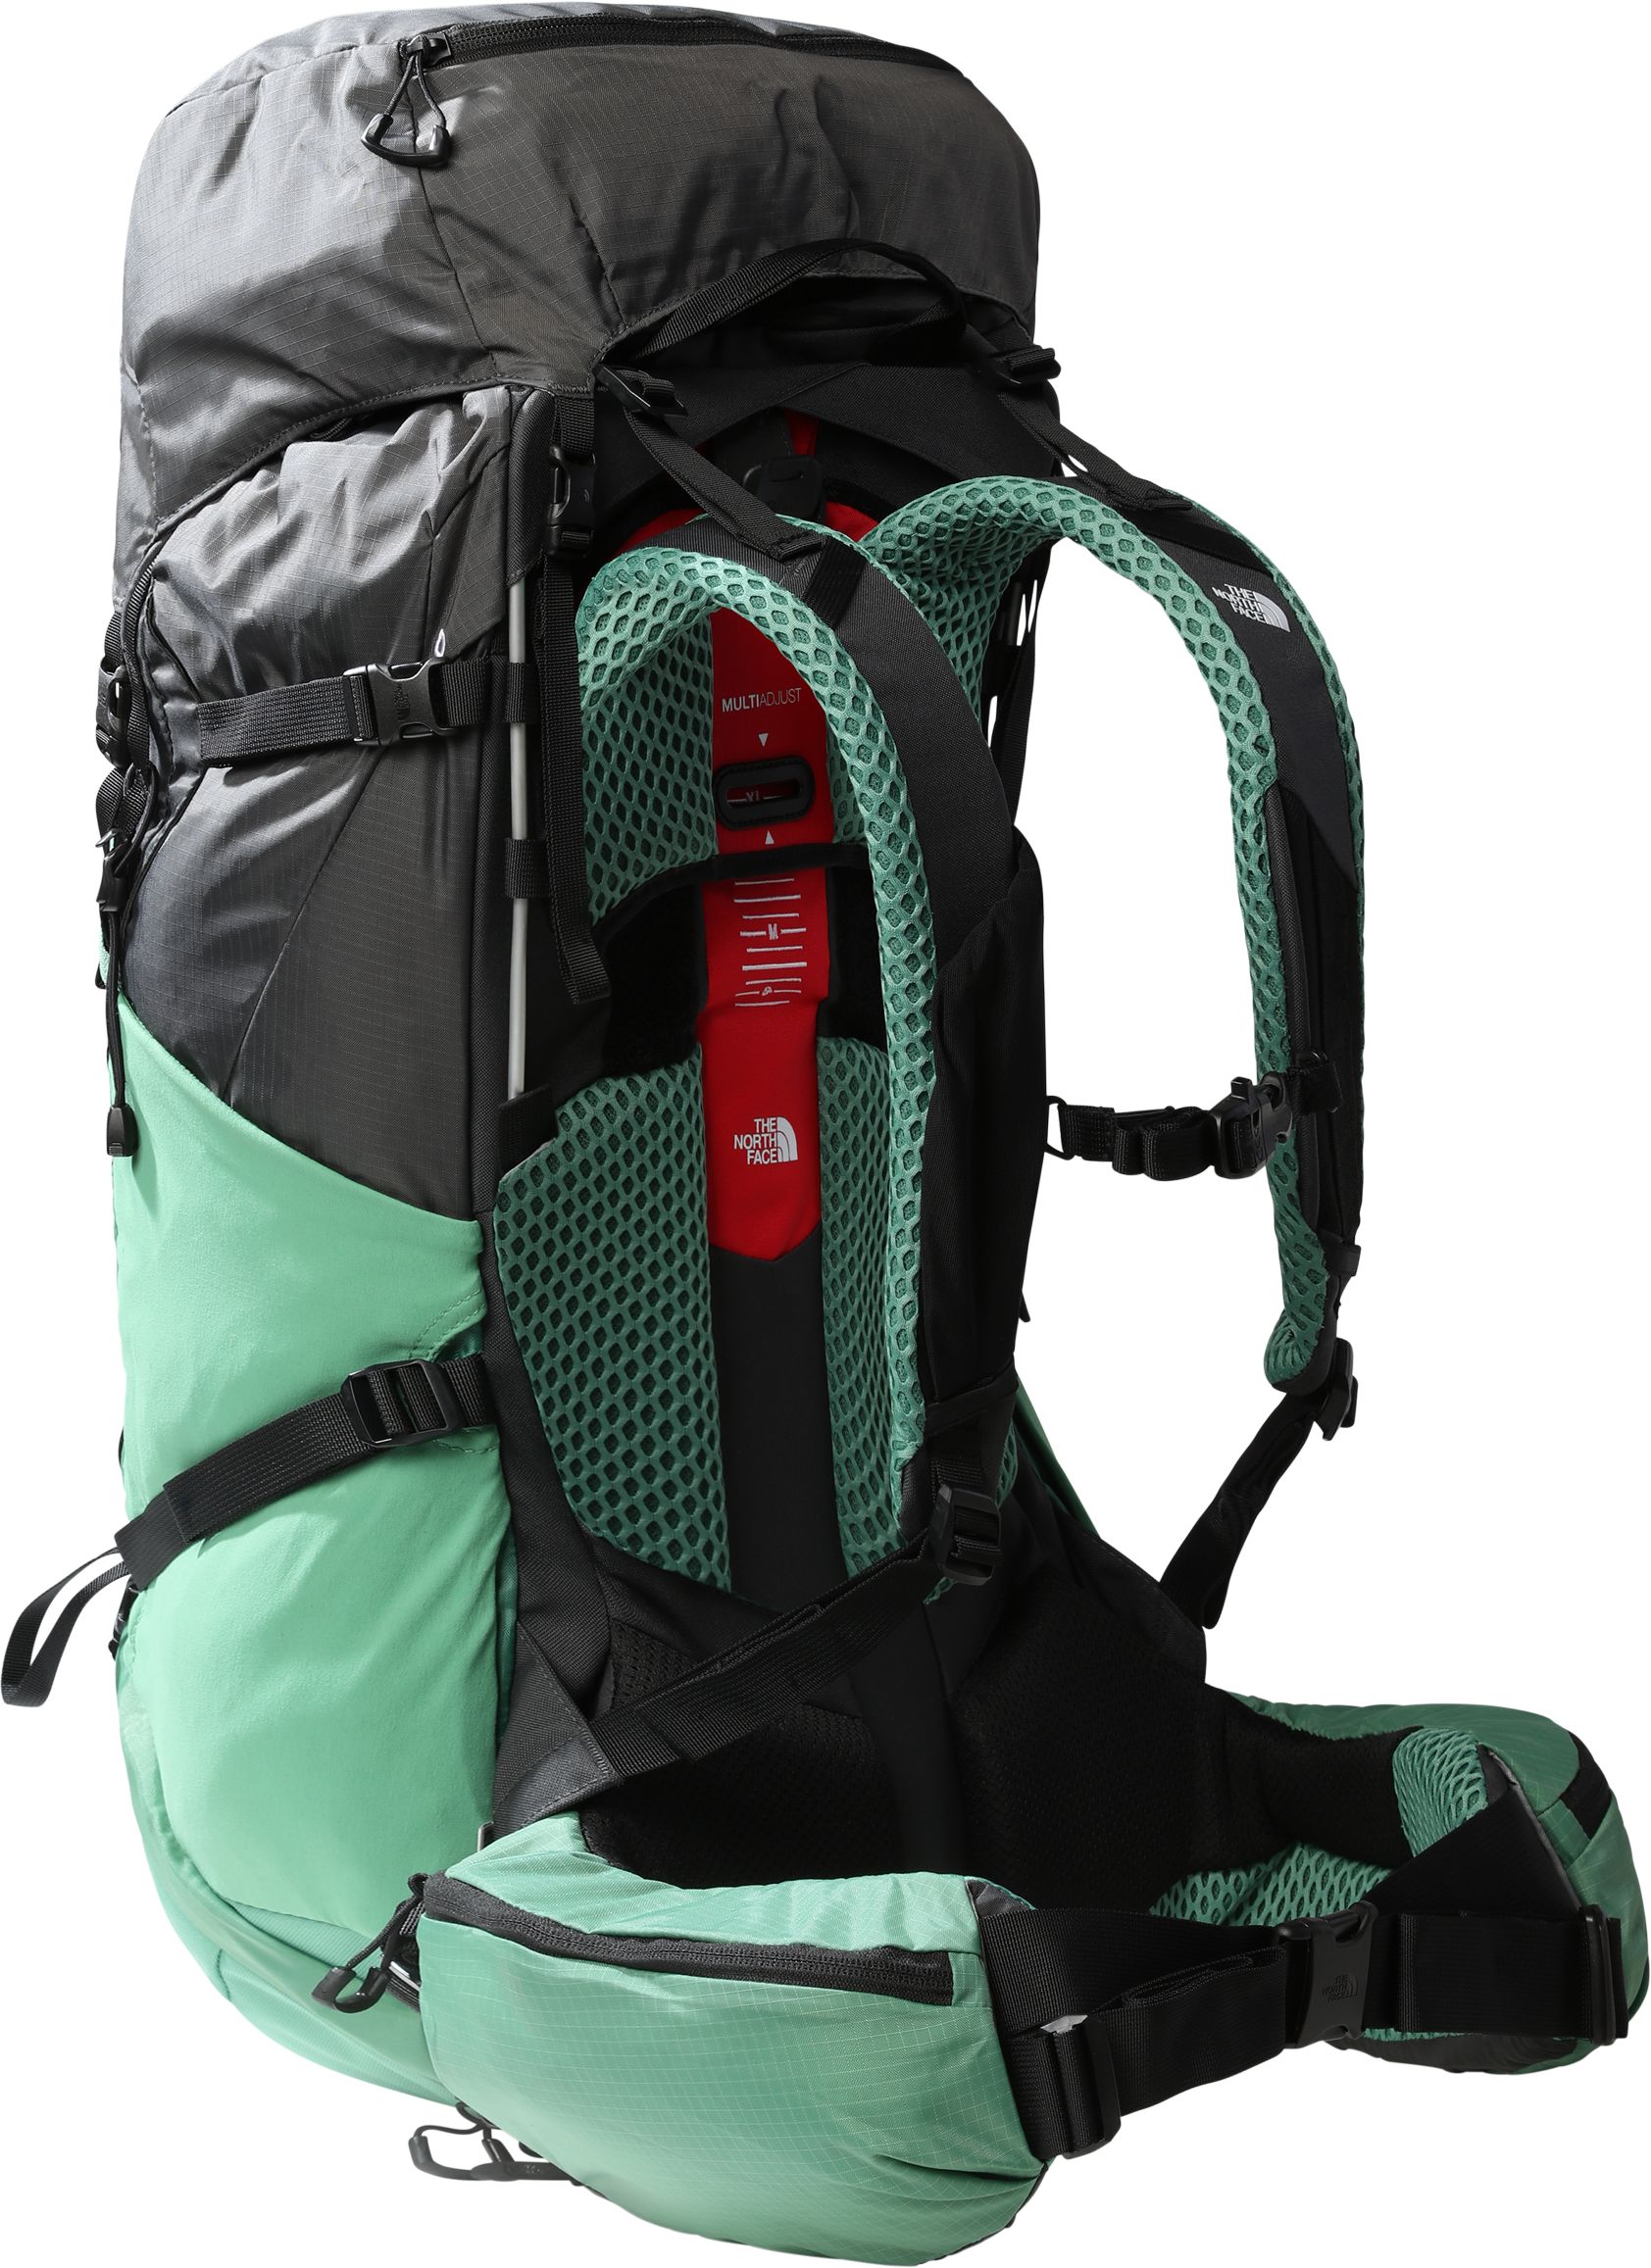 THE NORTH FACE, TRAIL LITE 65